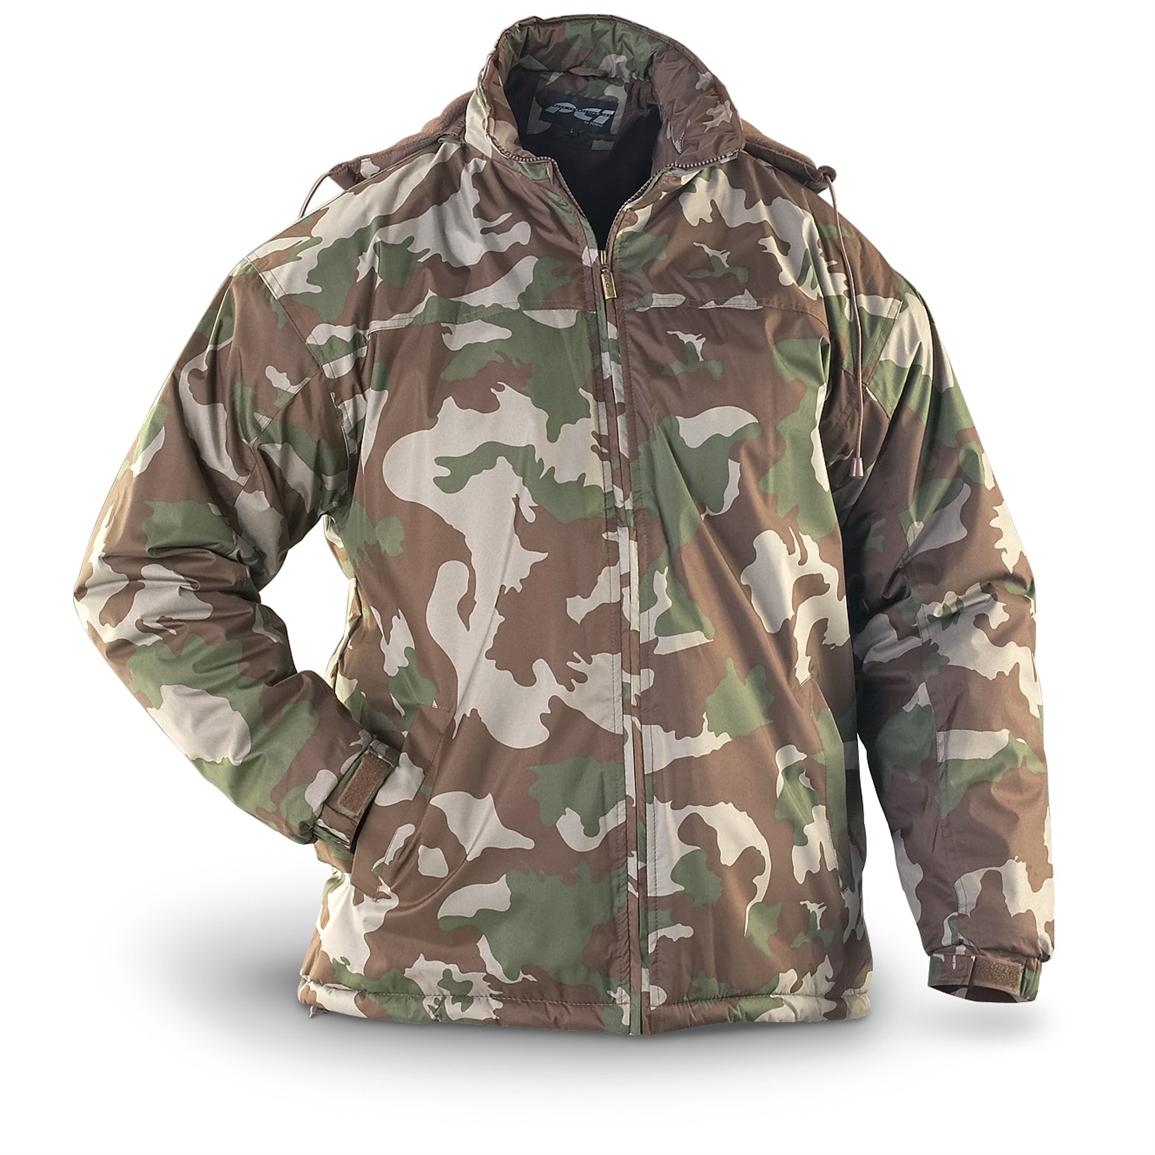 PCI® Hooded Camo Jacket - 162076, Camo Jackets at Sportsman's Guide